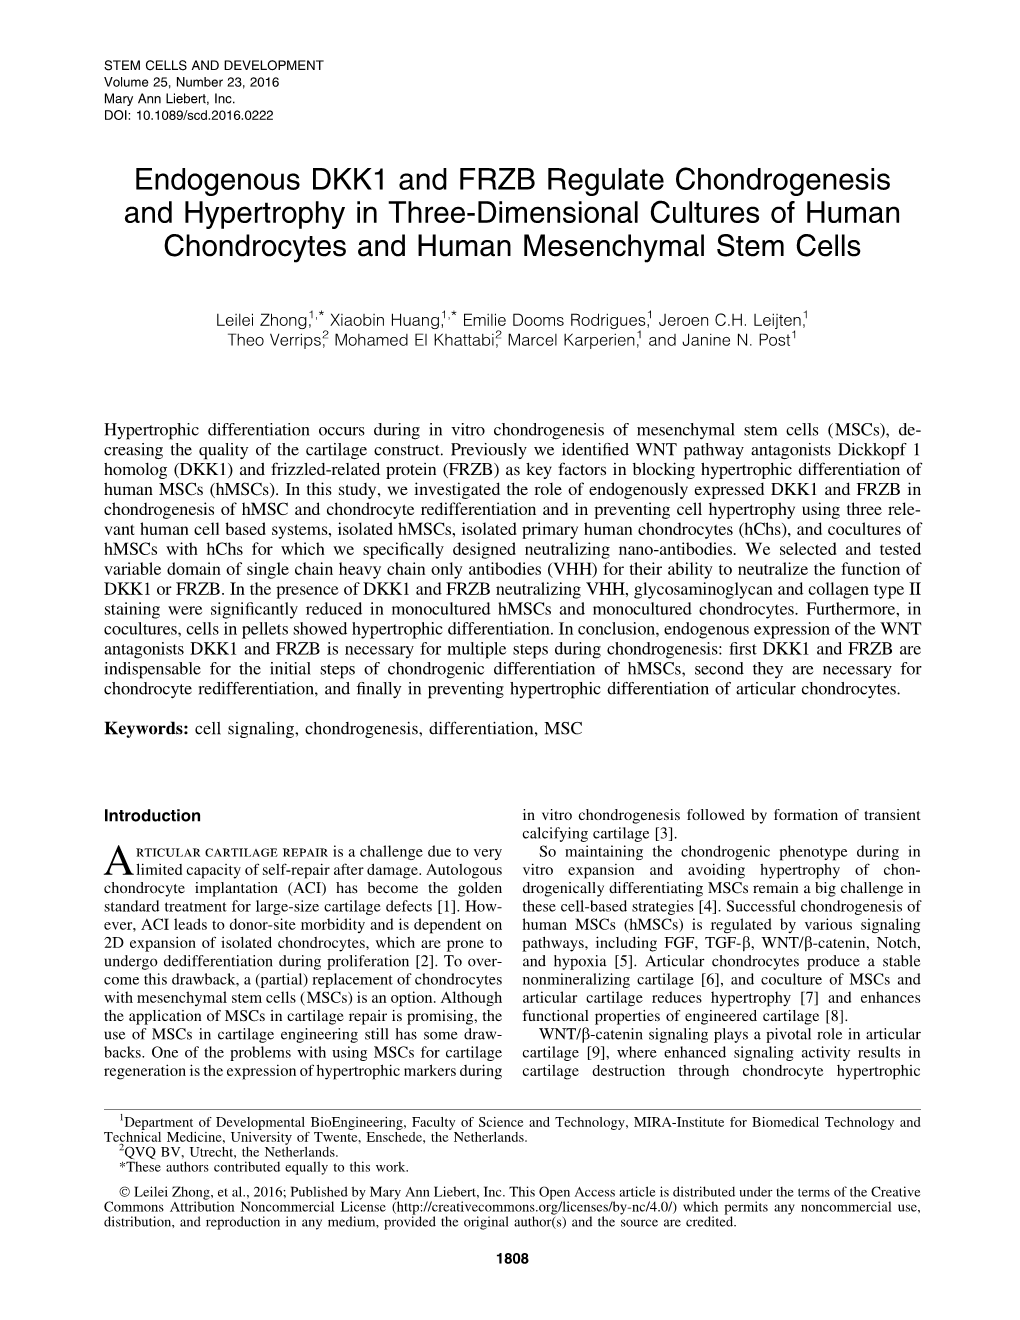 Endogenous DKK1 and FRZB Regulate Chondrogenesis and Hypertrophy in Three-Dimensional Cultures of Human Chondrocytes and Human Mesenchymal Stem Cells